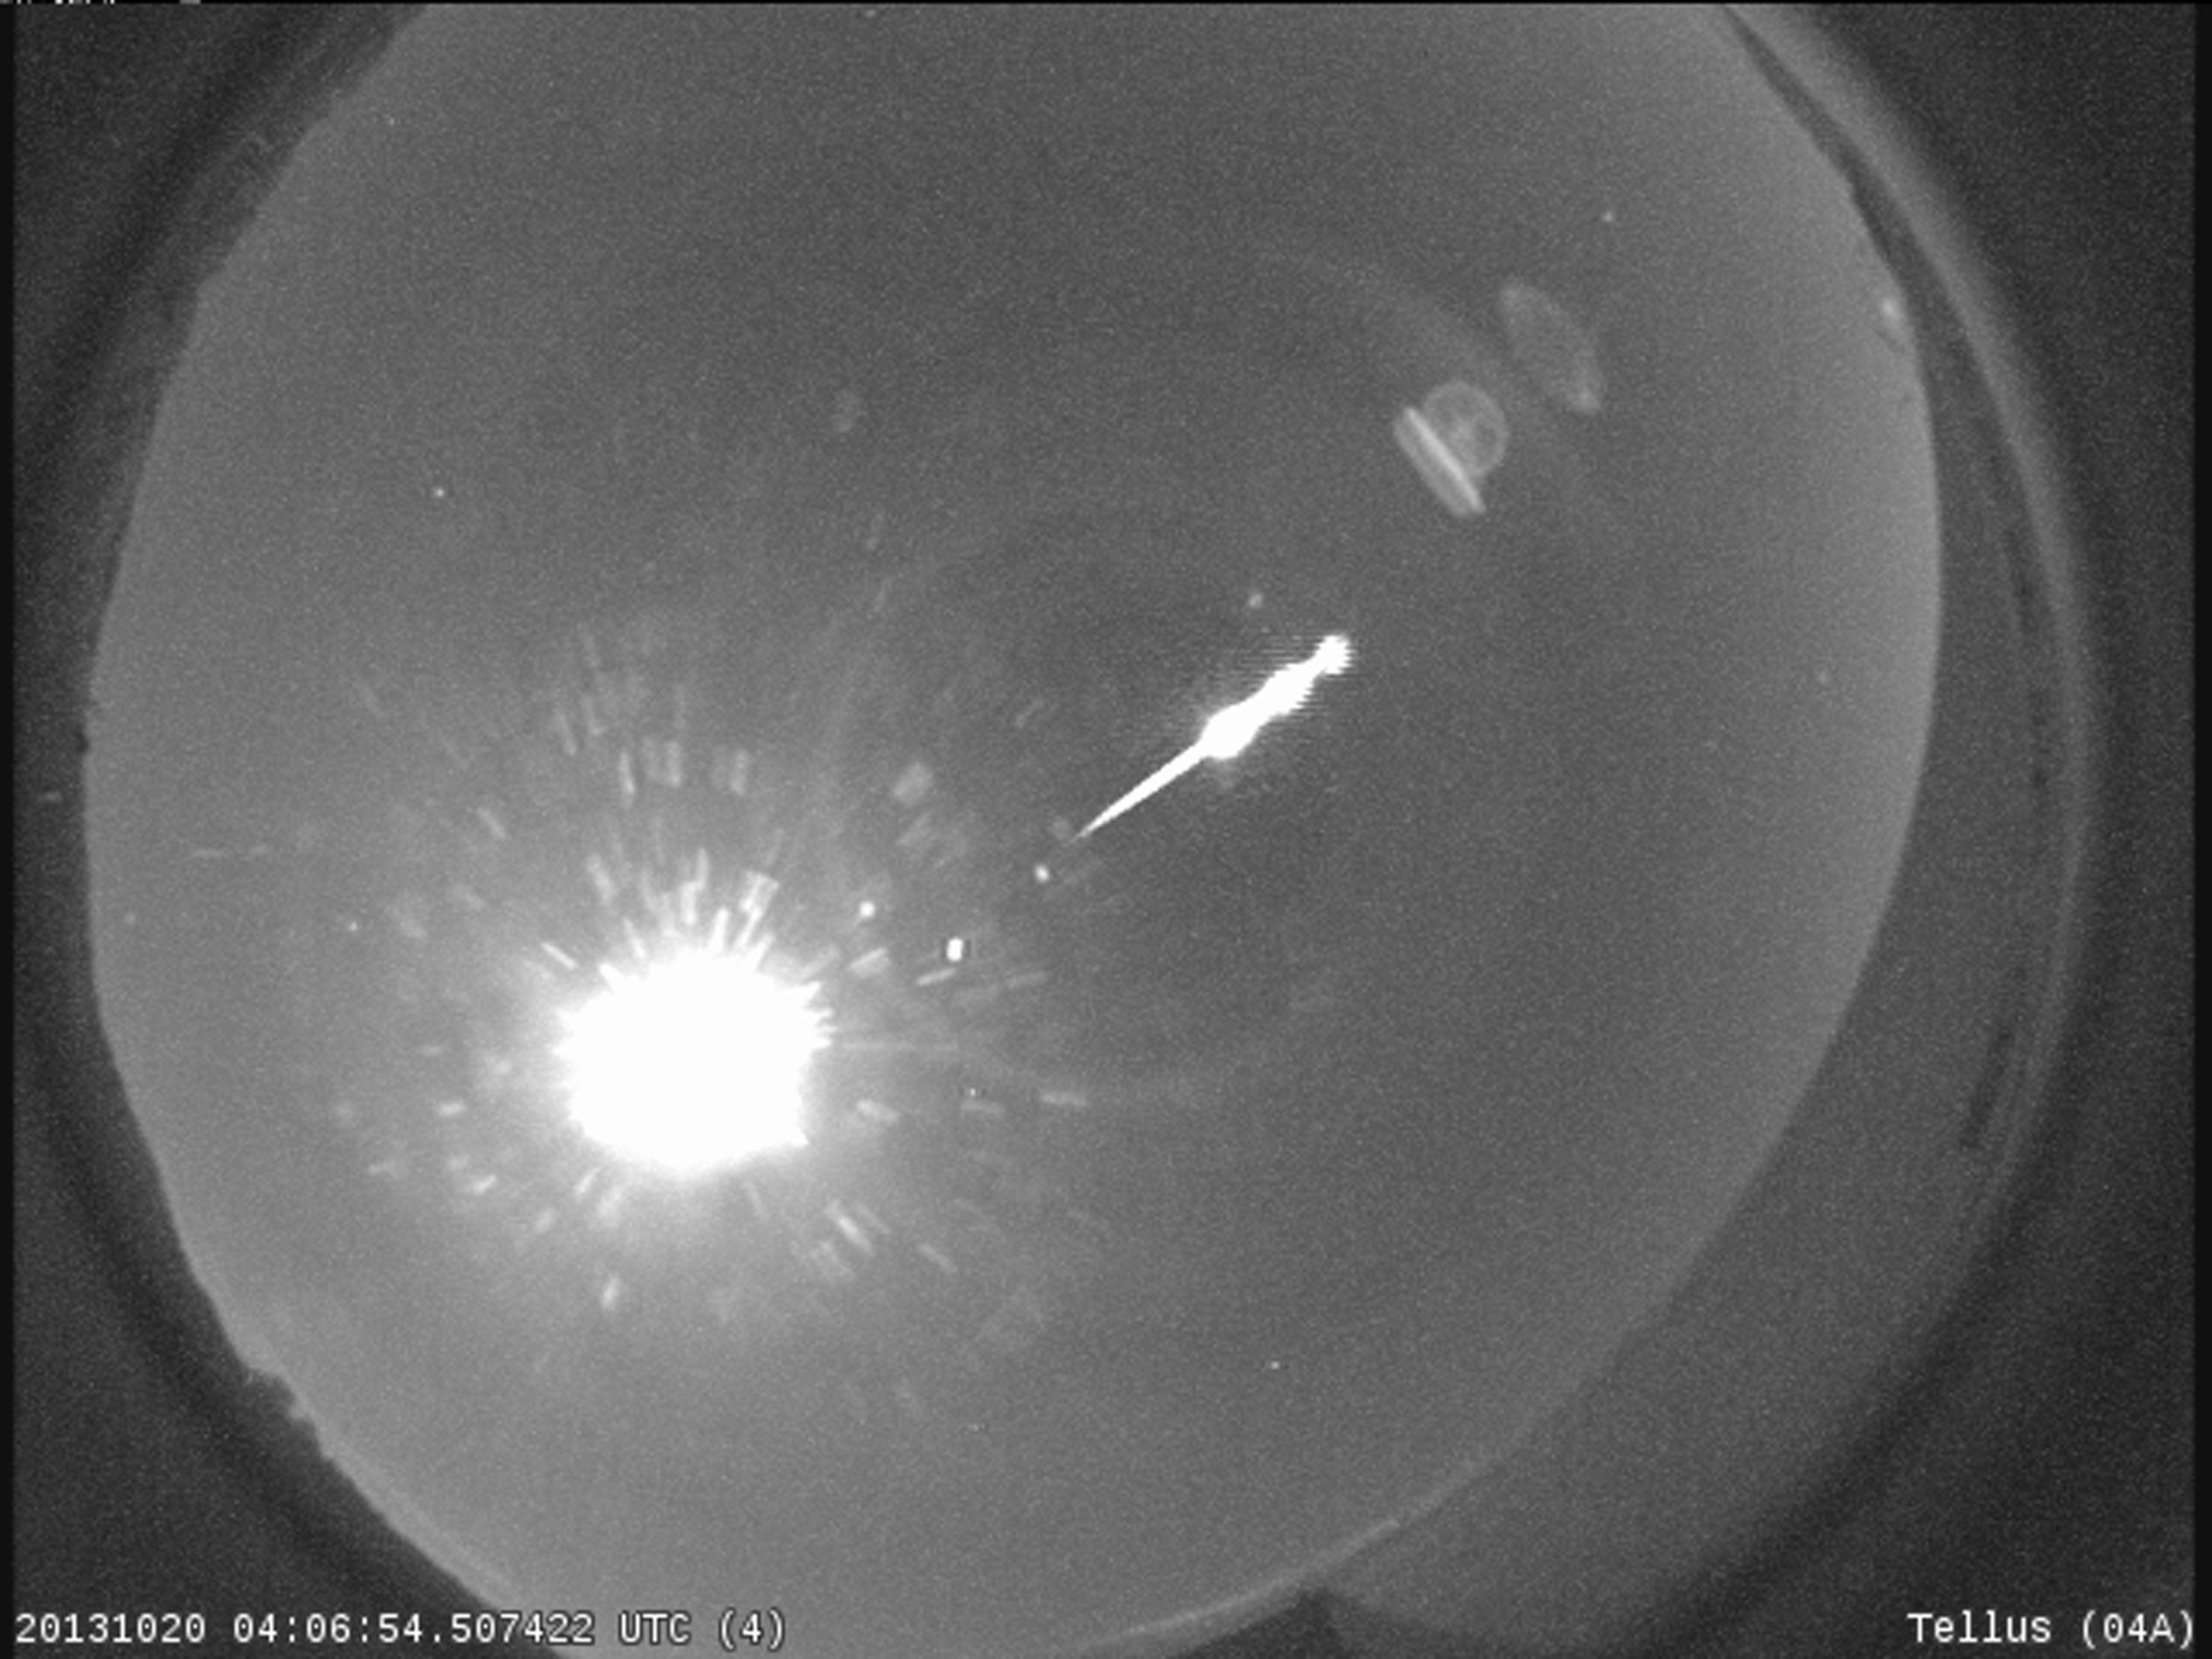 A bright Taurid fireball recorded by the NASA All Sky Fireball Network station in Cartersville, Georgia, in 2013. The bright orb is the Moon.